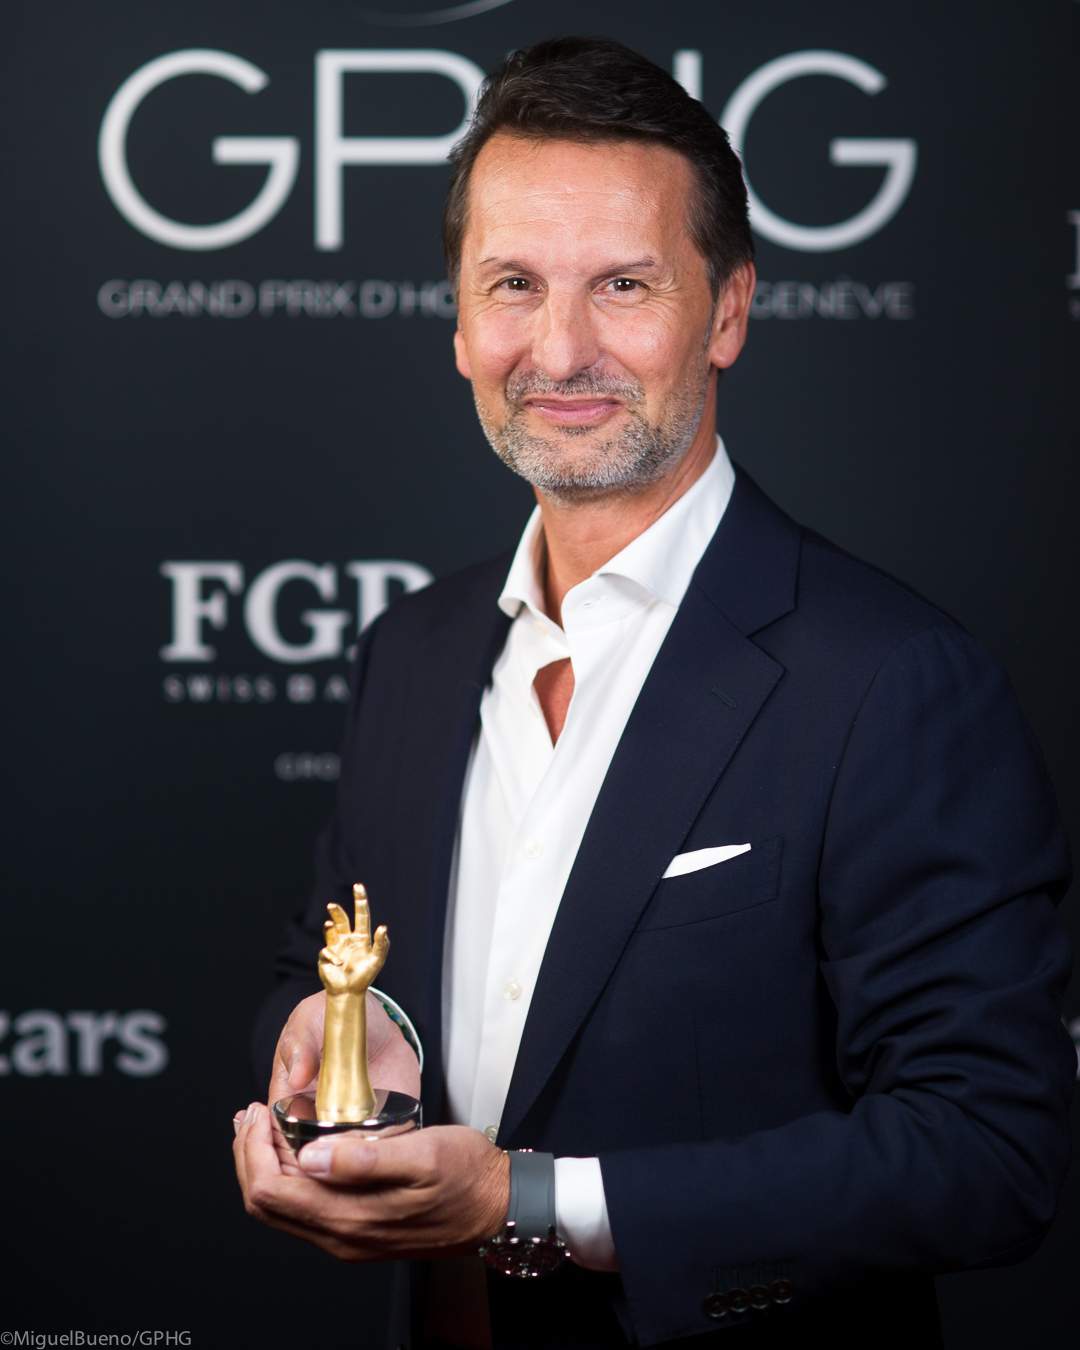 Maximilian Büsser,  Owner and creative director of MB&amp;F, winner of the Challenge Watch Prize 2022